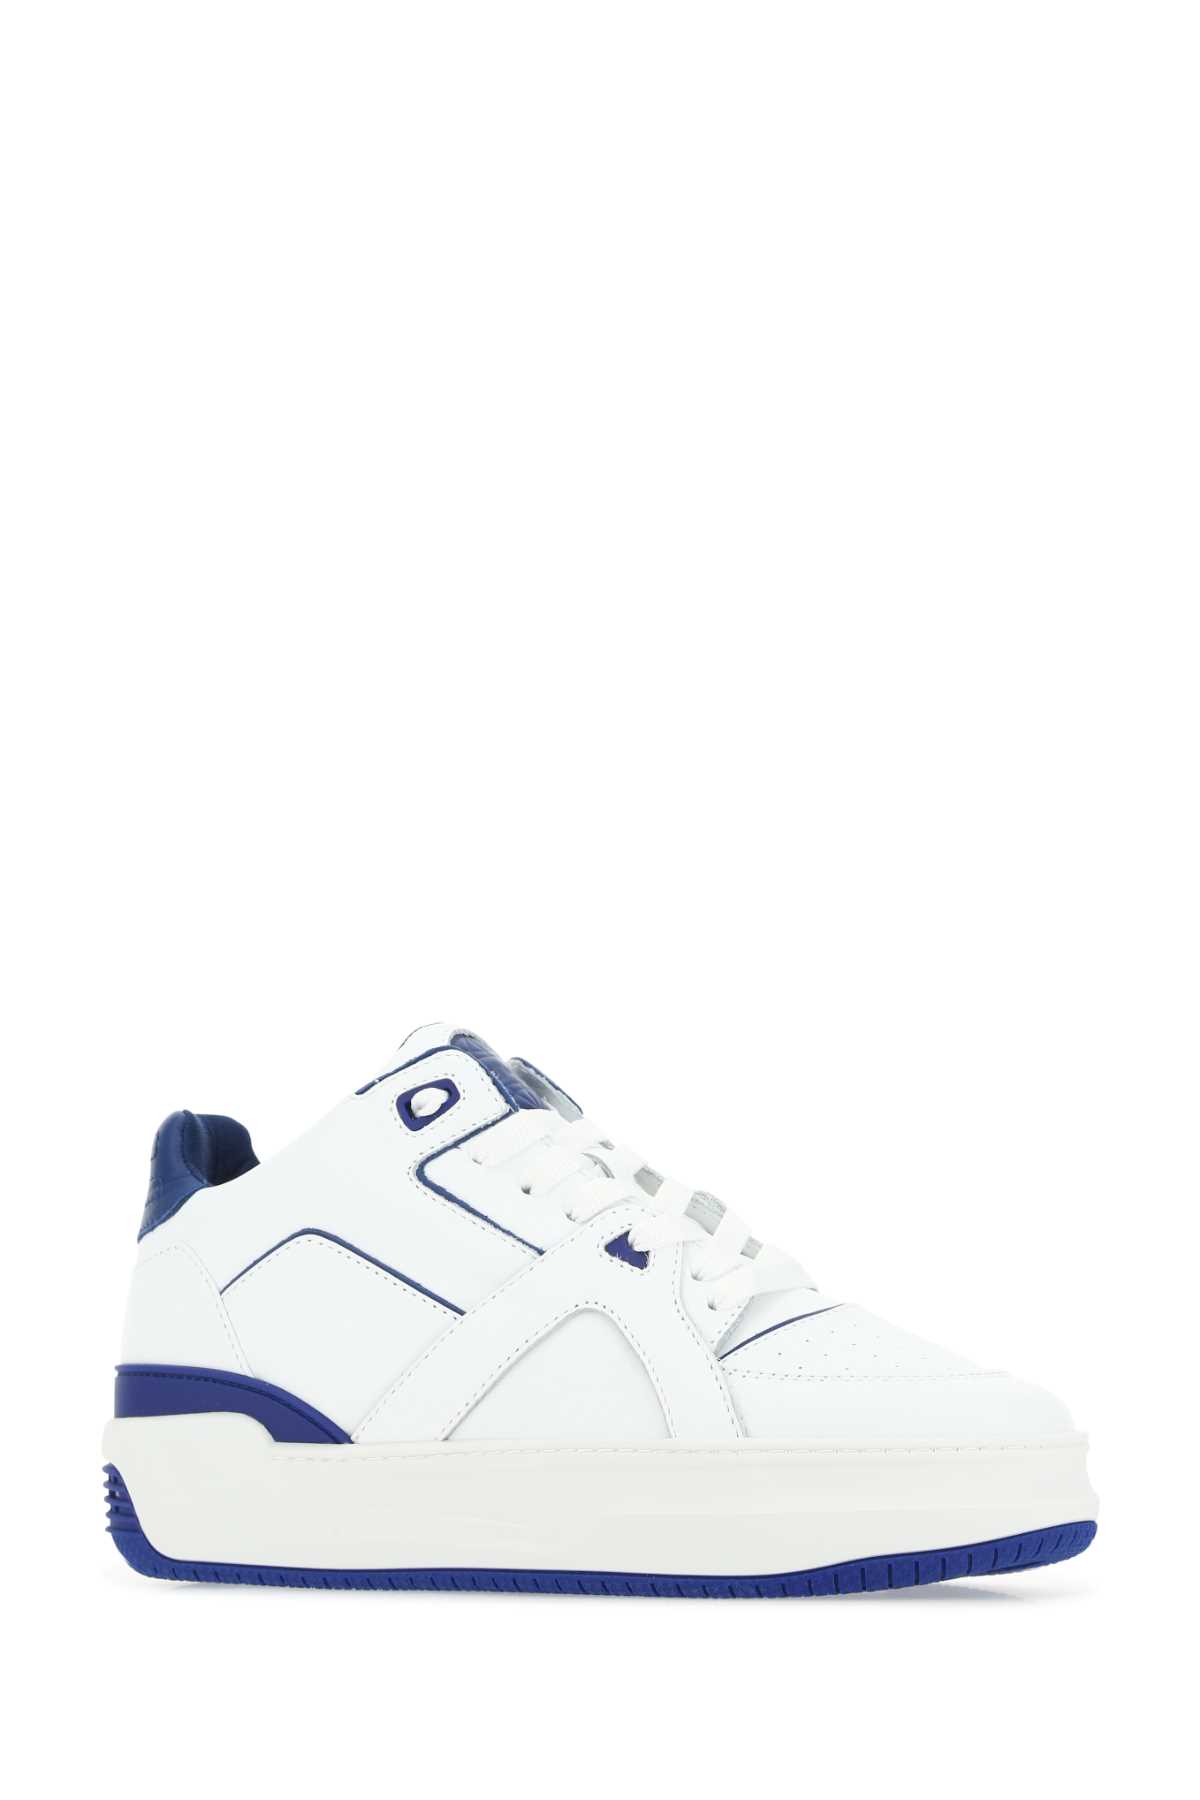 Just Don Two-tone Leather Courtside Lo Jd3 Sneakers In 85